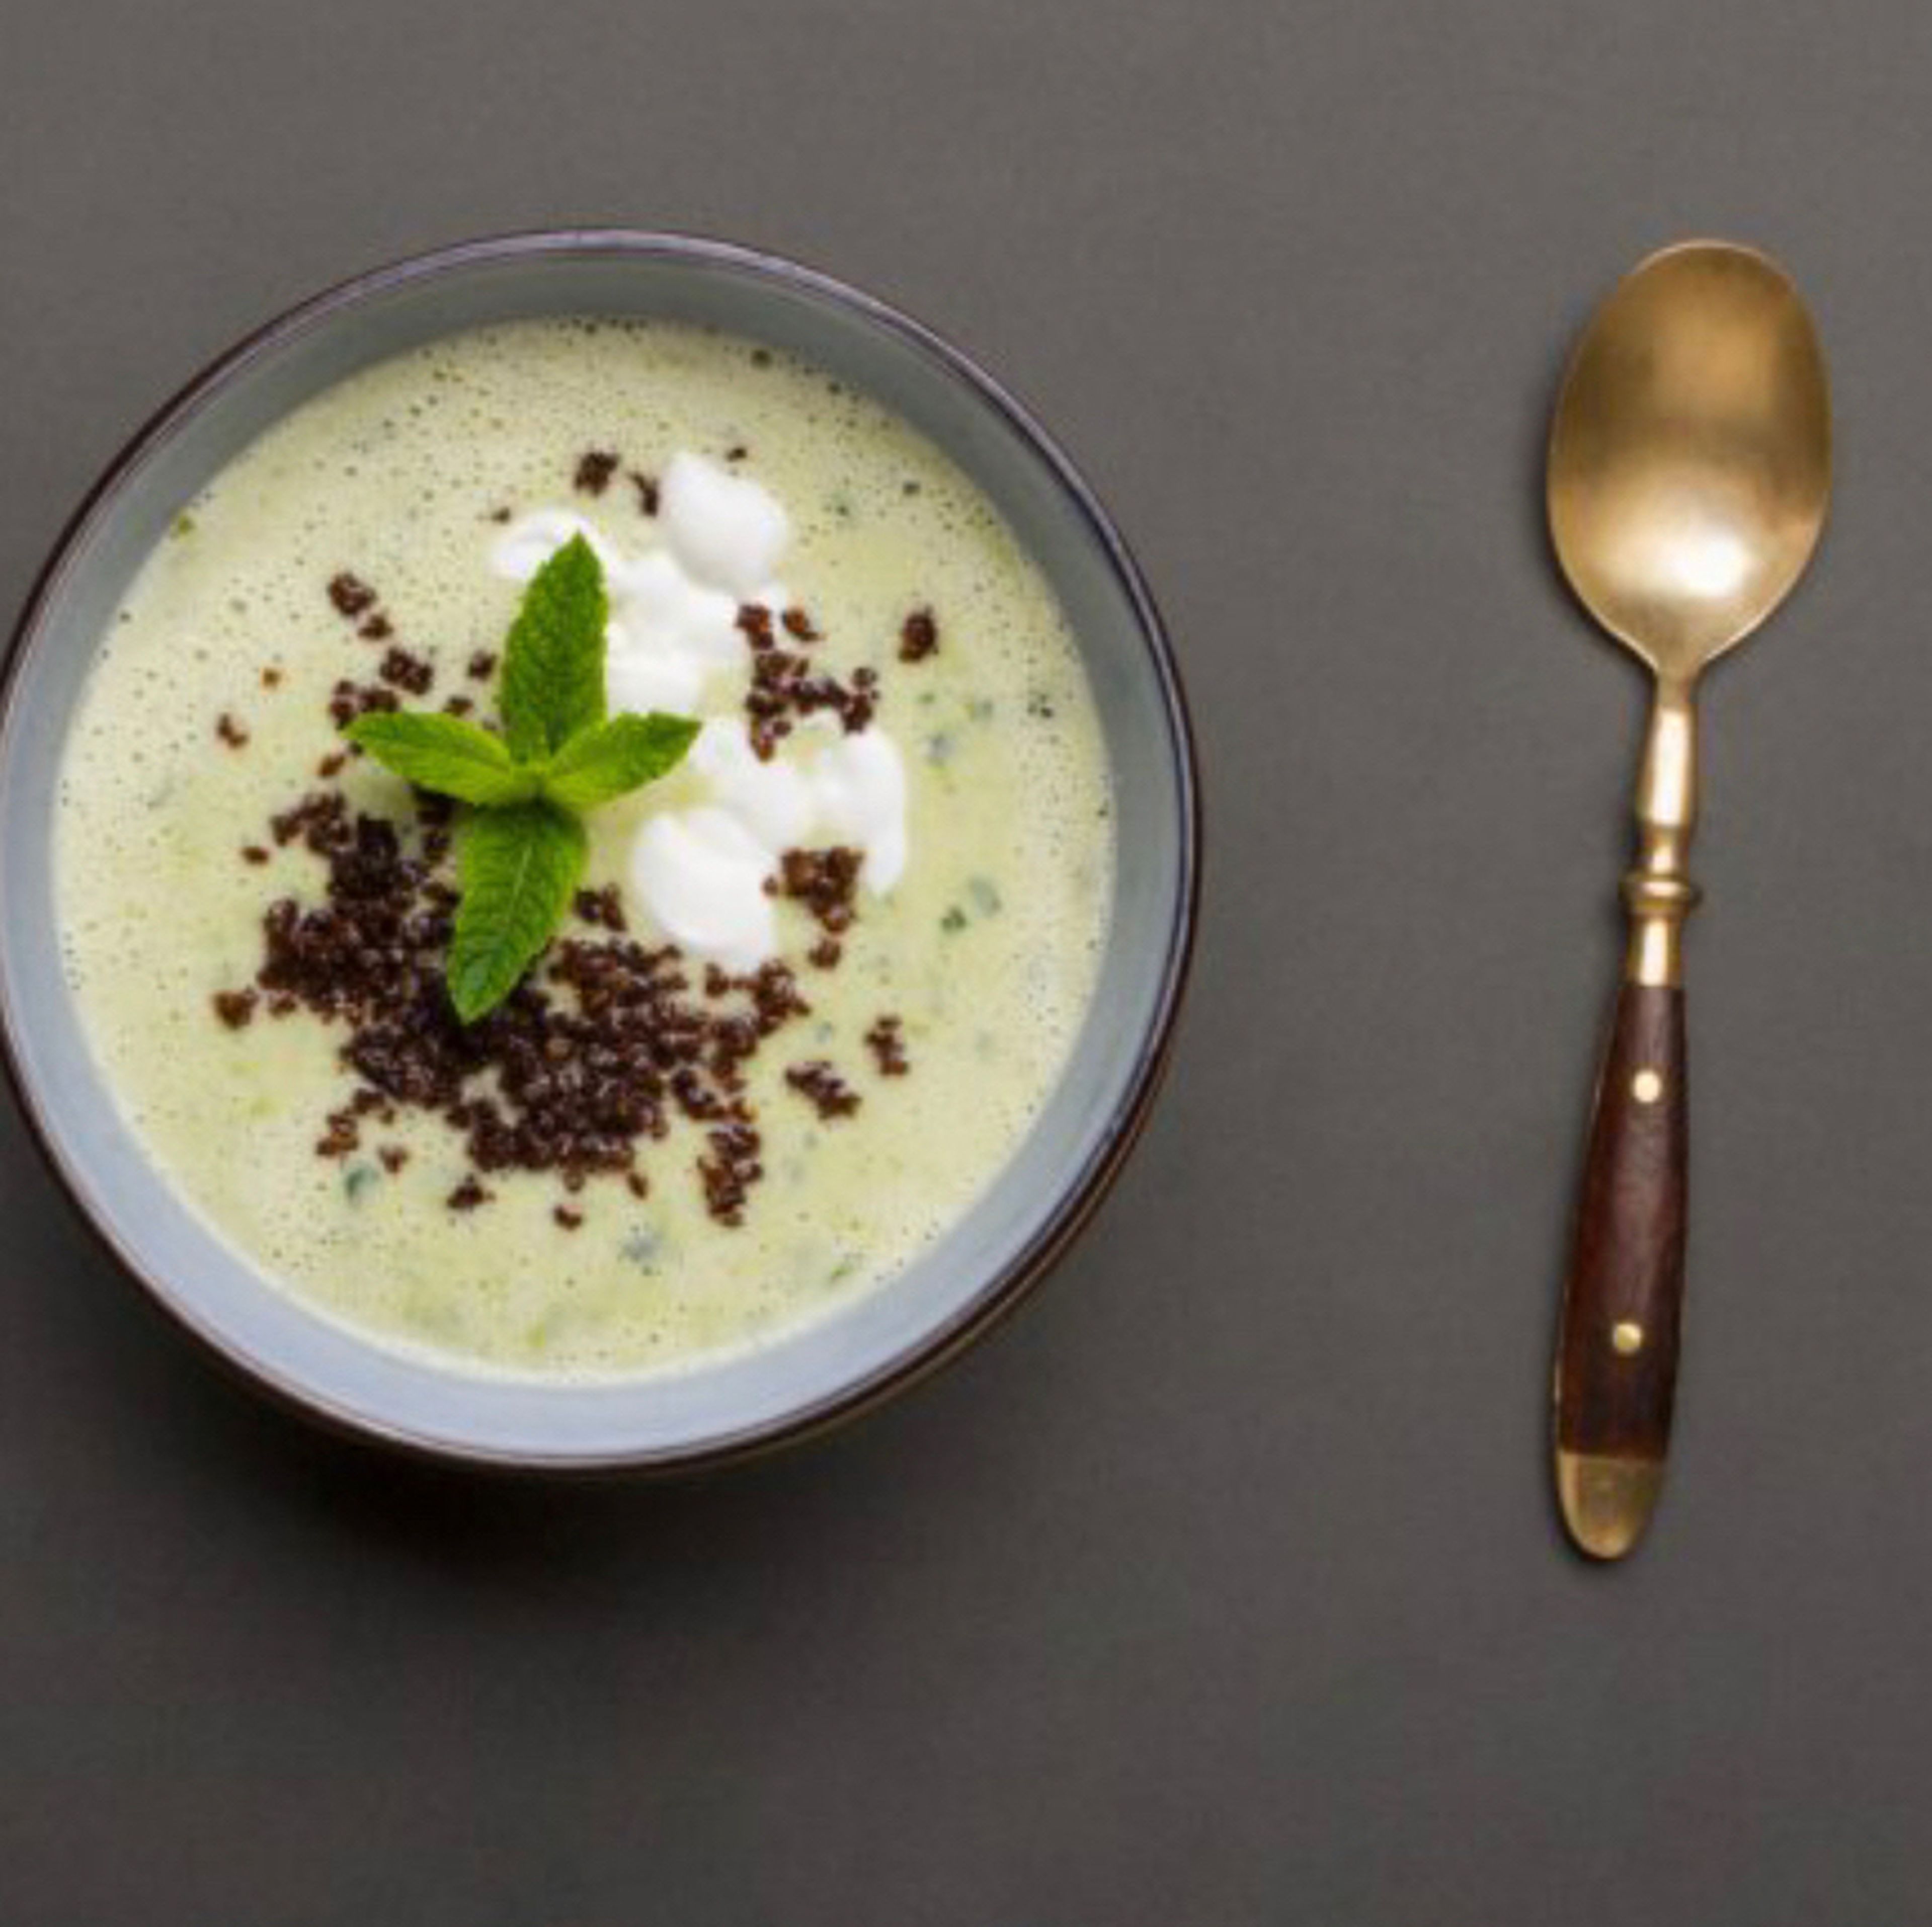 Pea and mint soup with roasted pumpernickel